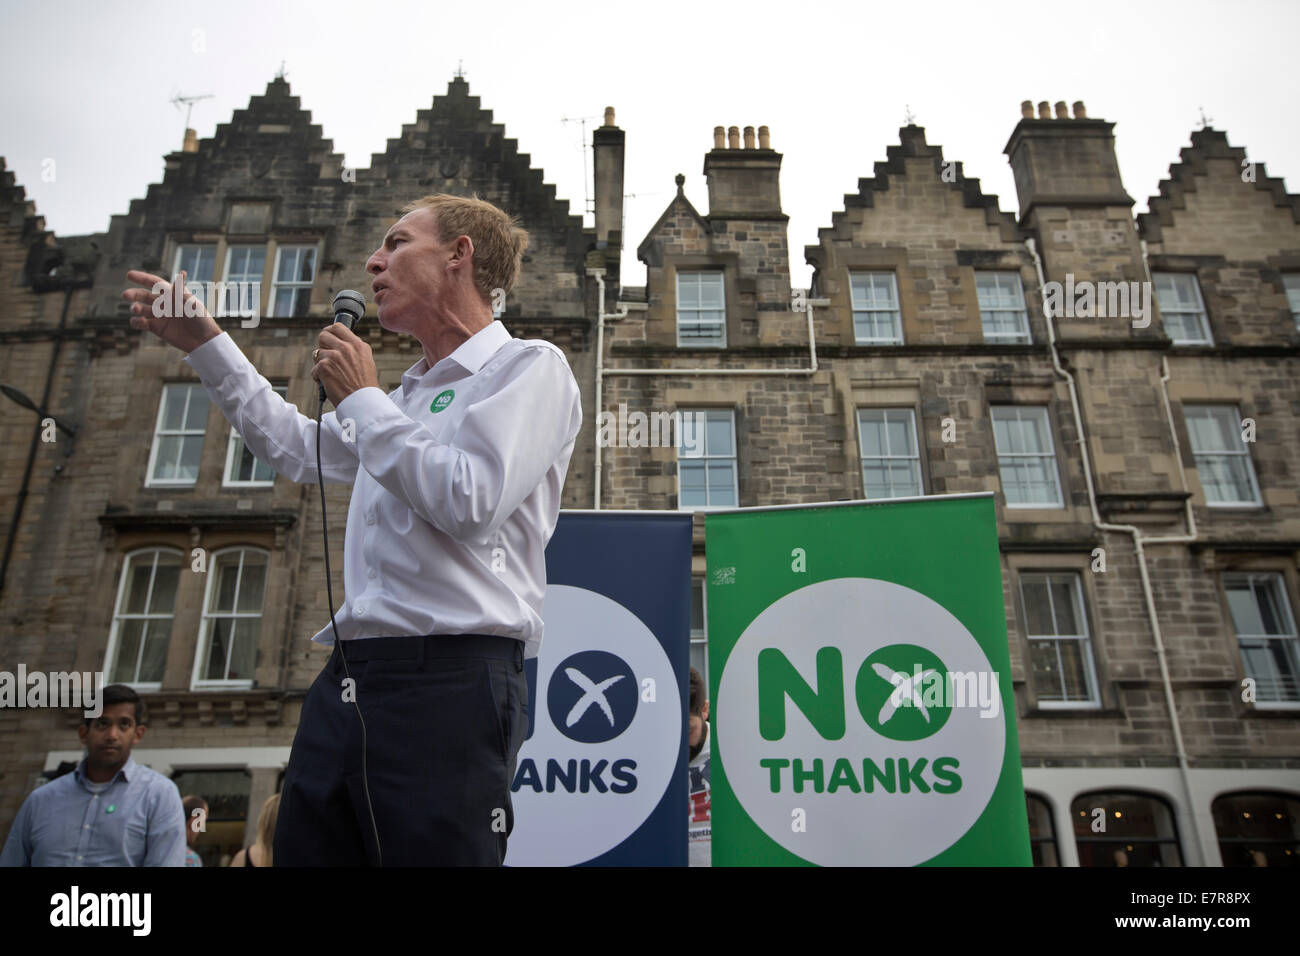 Anti-Scottish independence campaigner Jim Murphy MP speaking at a No Thanks event in Edinburgh. Stock Photo